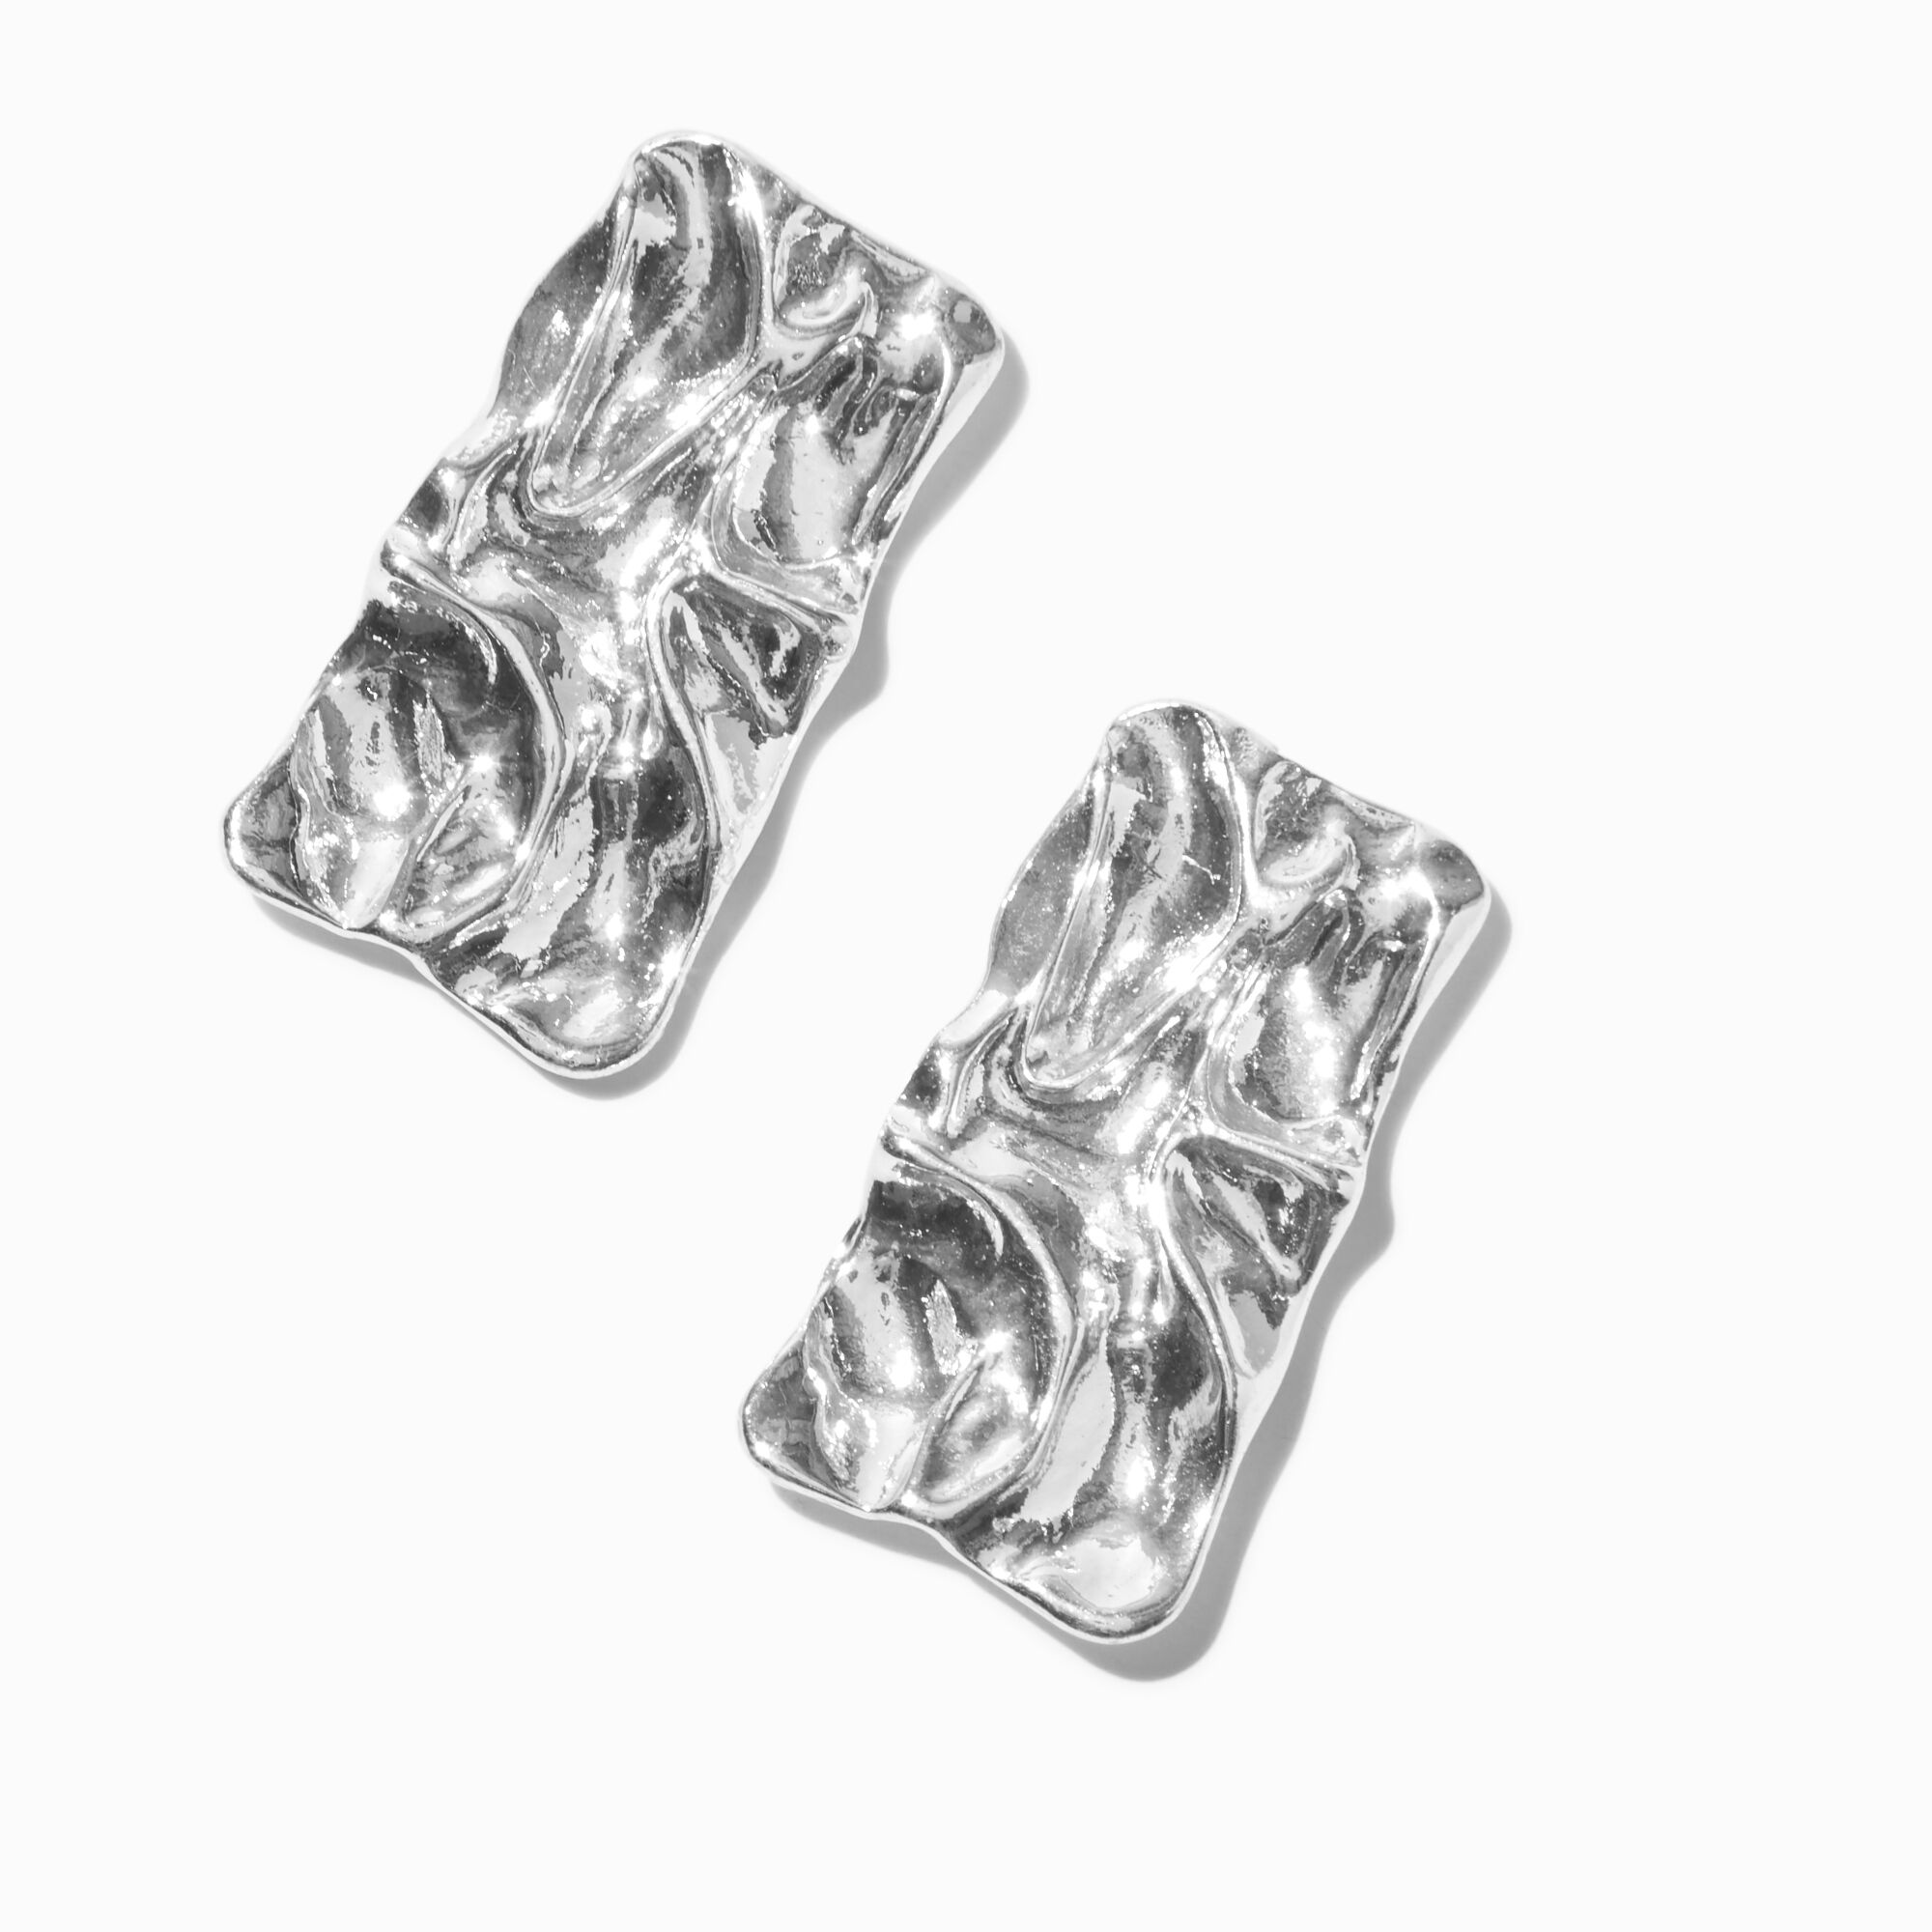 View Claires Tone Crumpled Rectangle 15 Drop Earrings Silver information